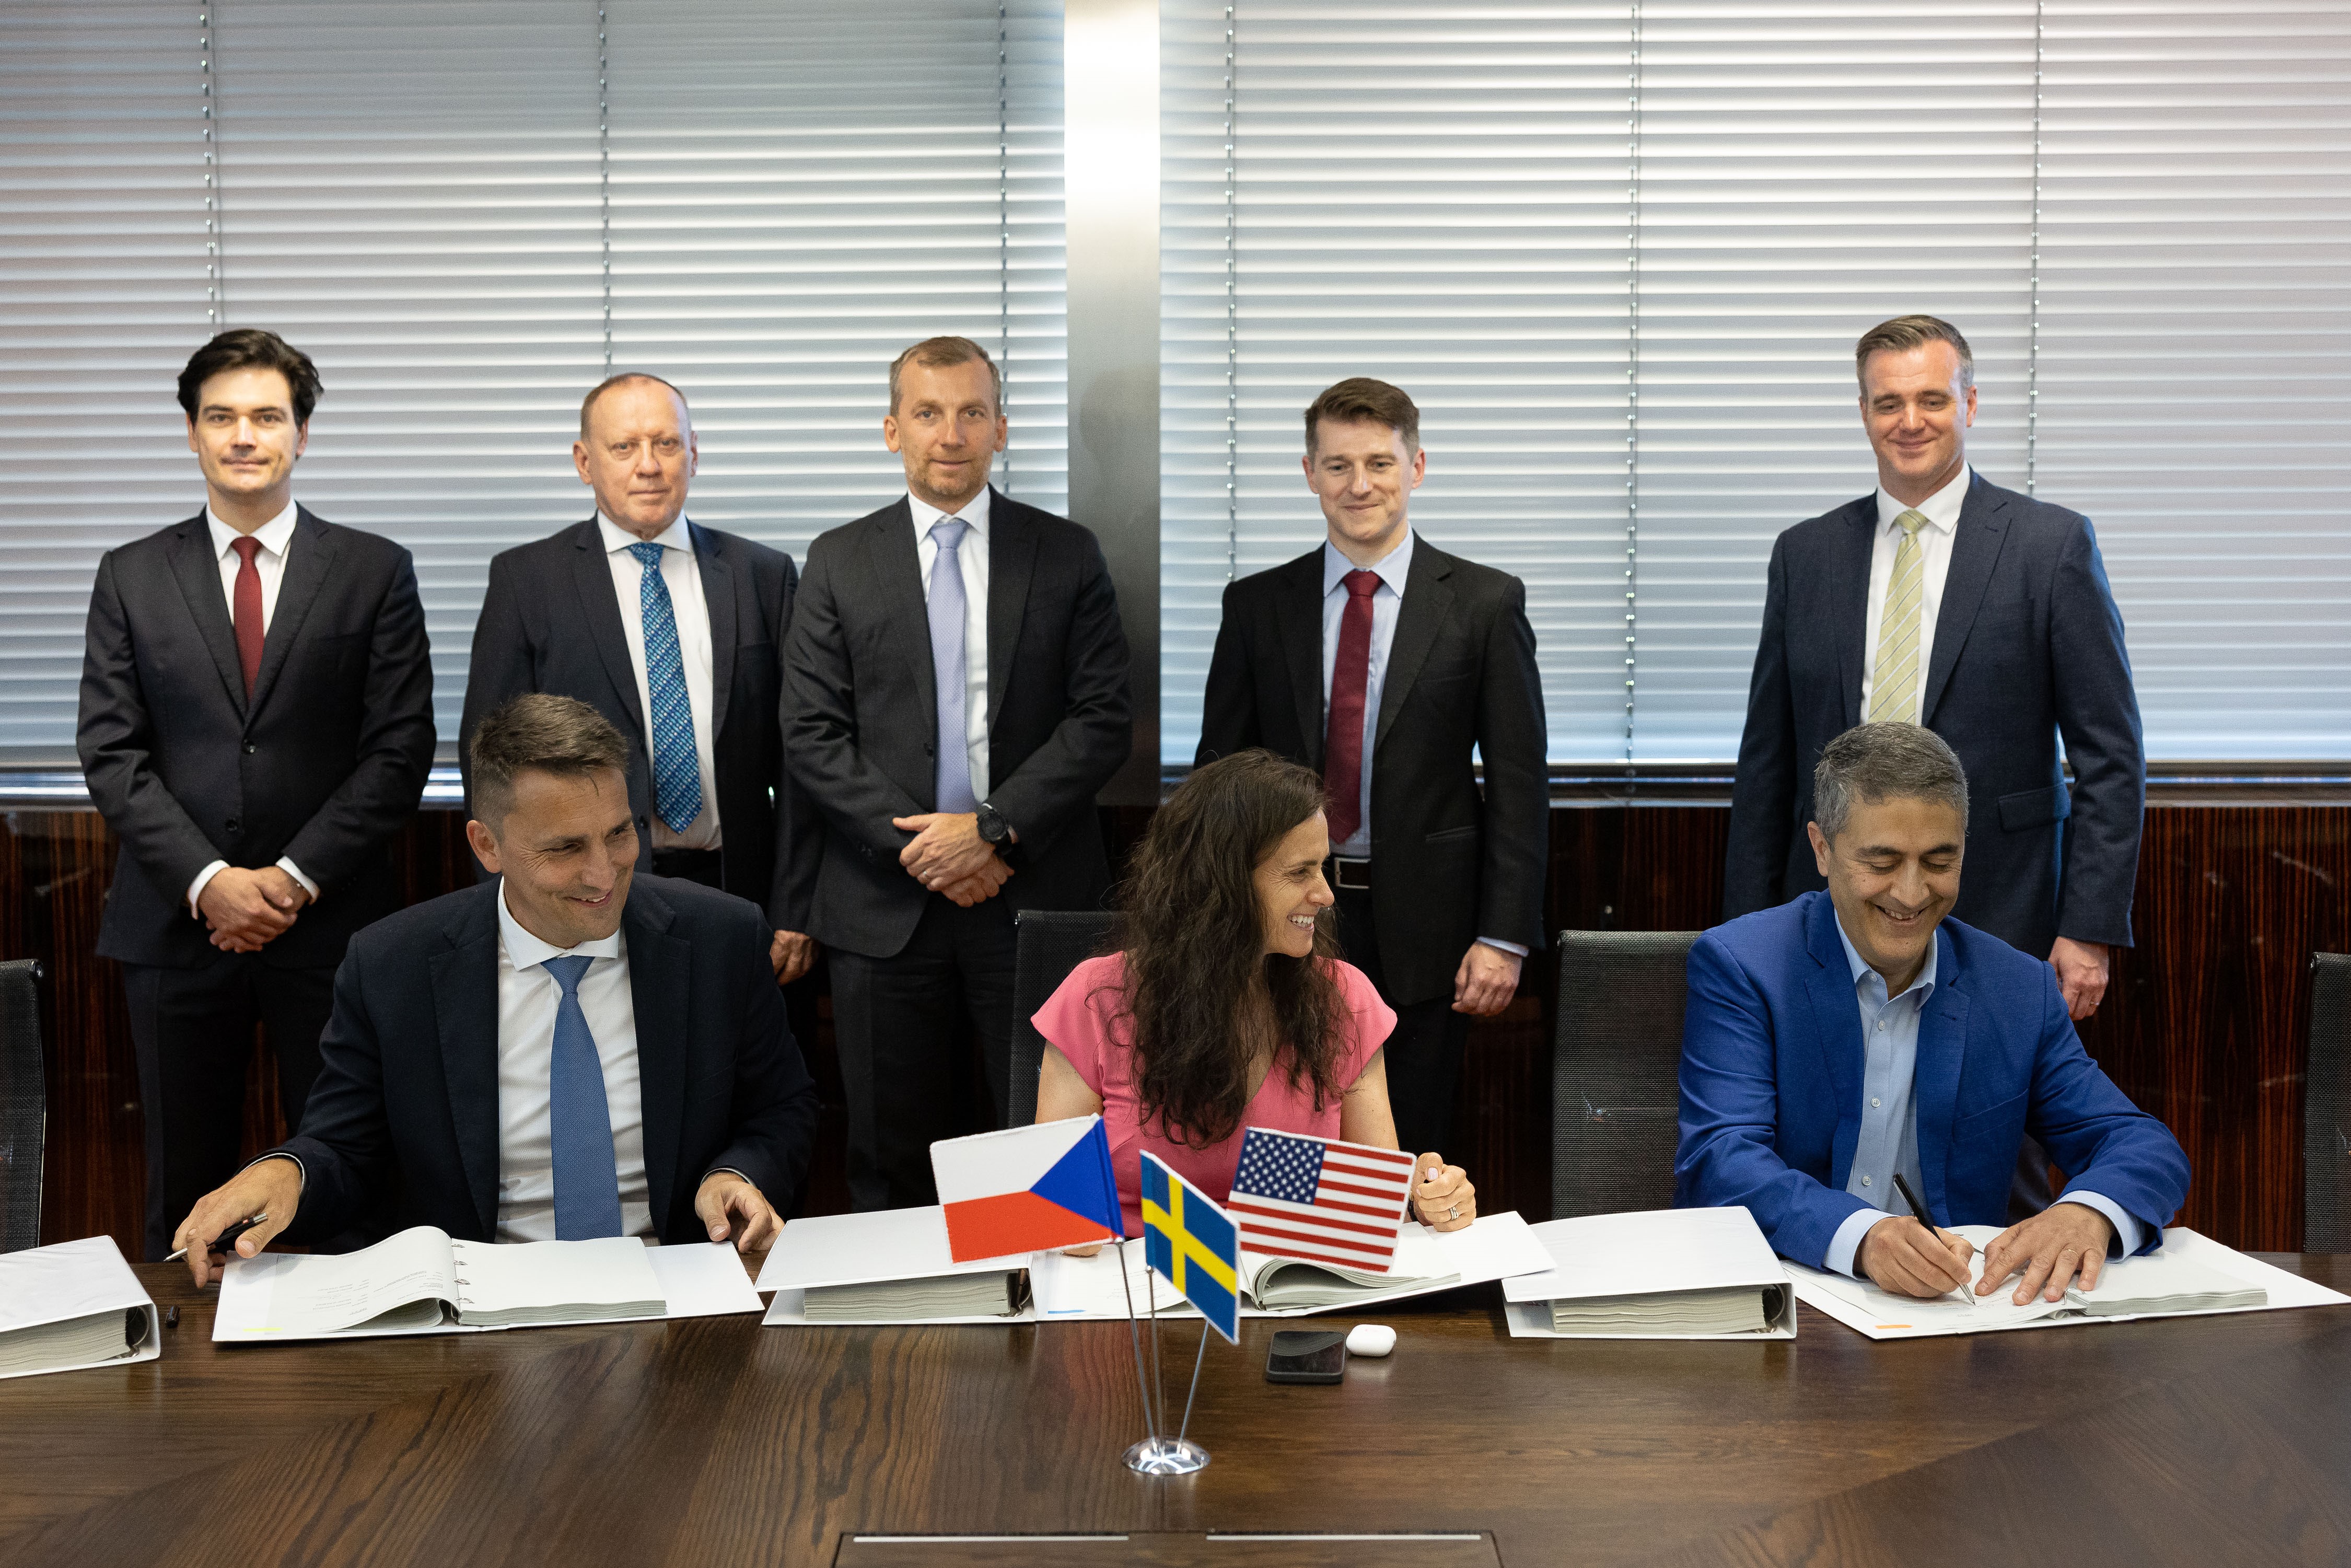 Seated (L to R): Bohdan Zronek, ČEZ member of the Board of Directors and Director of the Nuclear Energy Division; Michaela Chaloupkova, Member of the Board of Directors and Director of the Administration Division; Tarik Choho, President of Westinghouse Fuel.